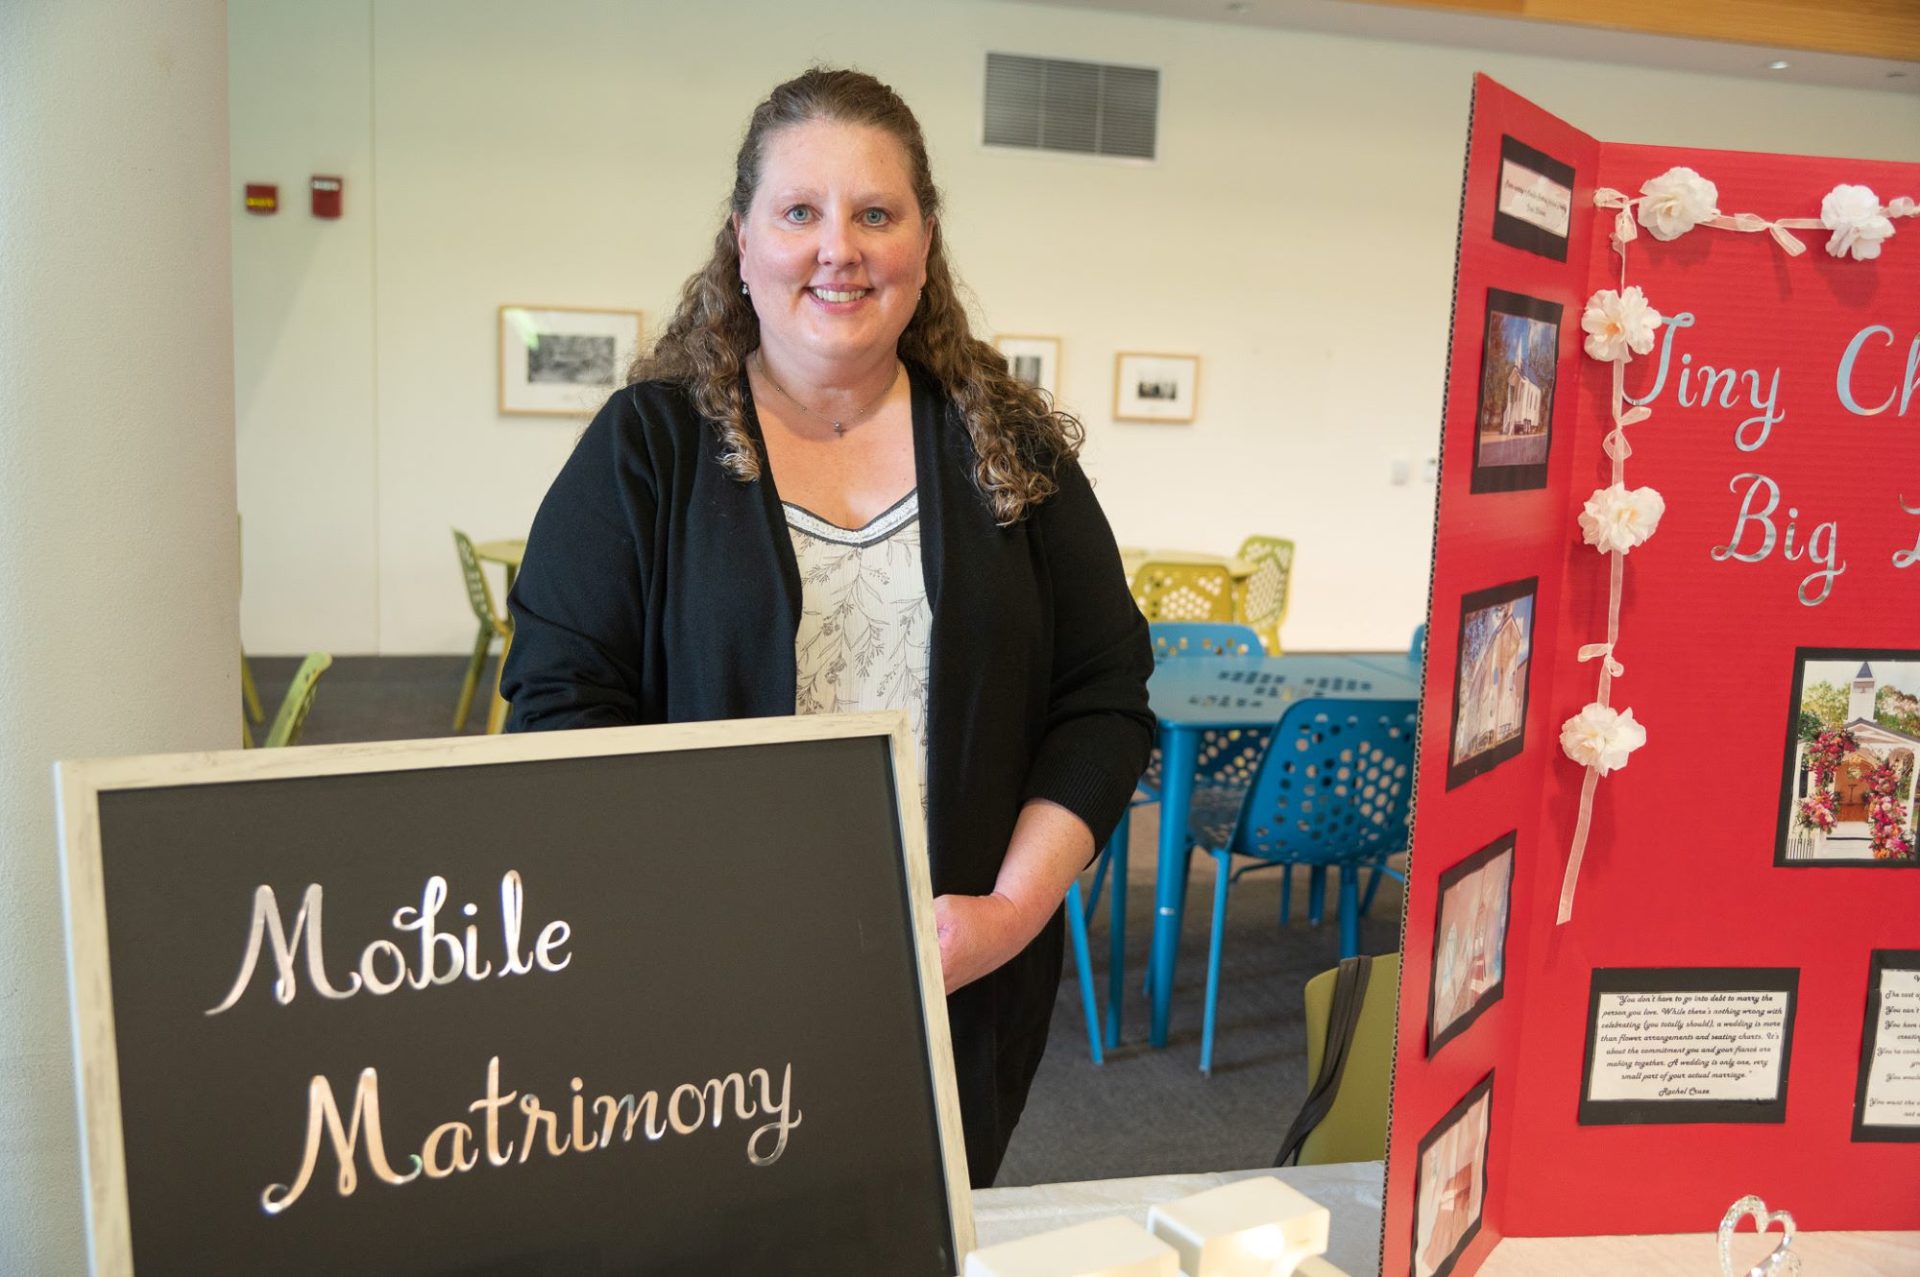 A white woman with long light brown hair, wearing a white shirt and black sweater, is standing behind a white table. There is a red tri-fold board on one side, of the table, and a black sign that says Mobile Matrimony in script on the other side.